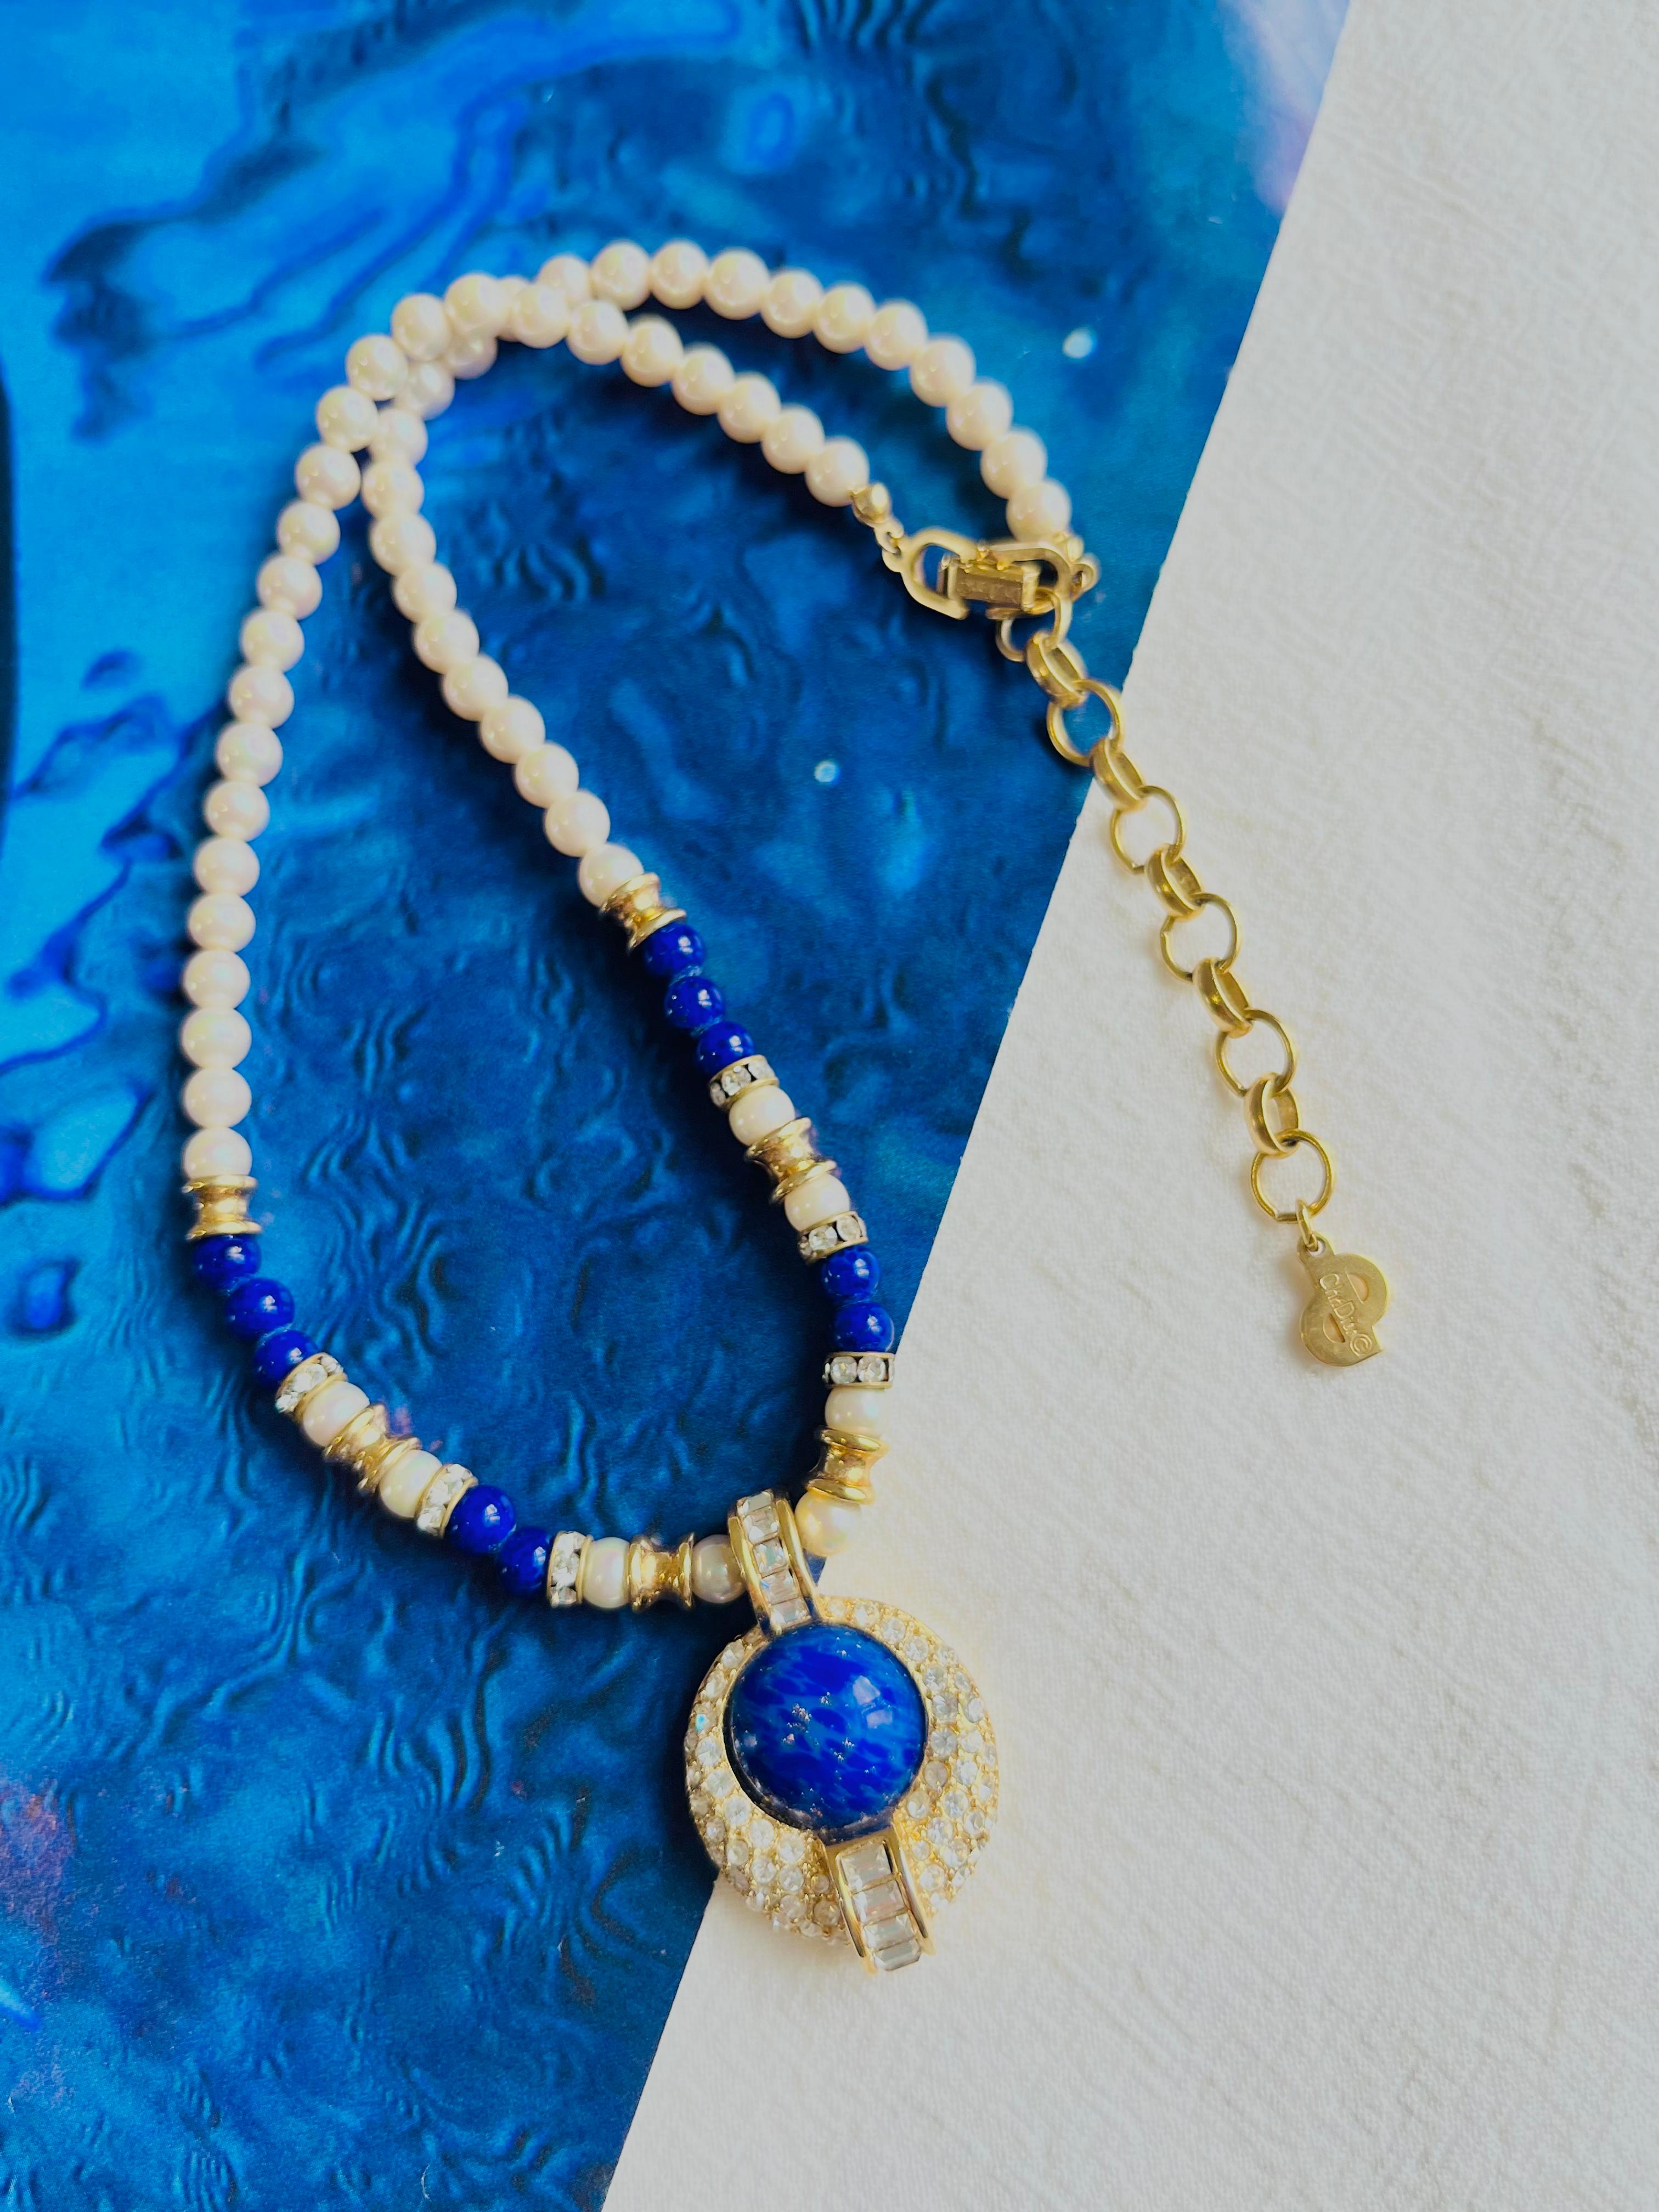 Christian Dior Vintage 1980s White Pearls Lapis Cabochon Crystals Oval Necklace In Excellent Condition For Sale In Wokingham, England